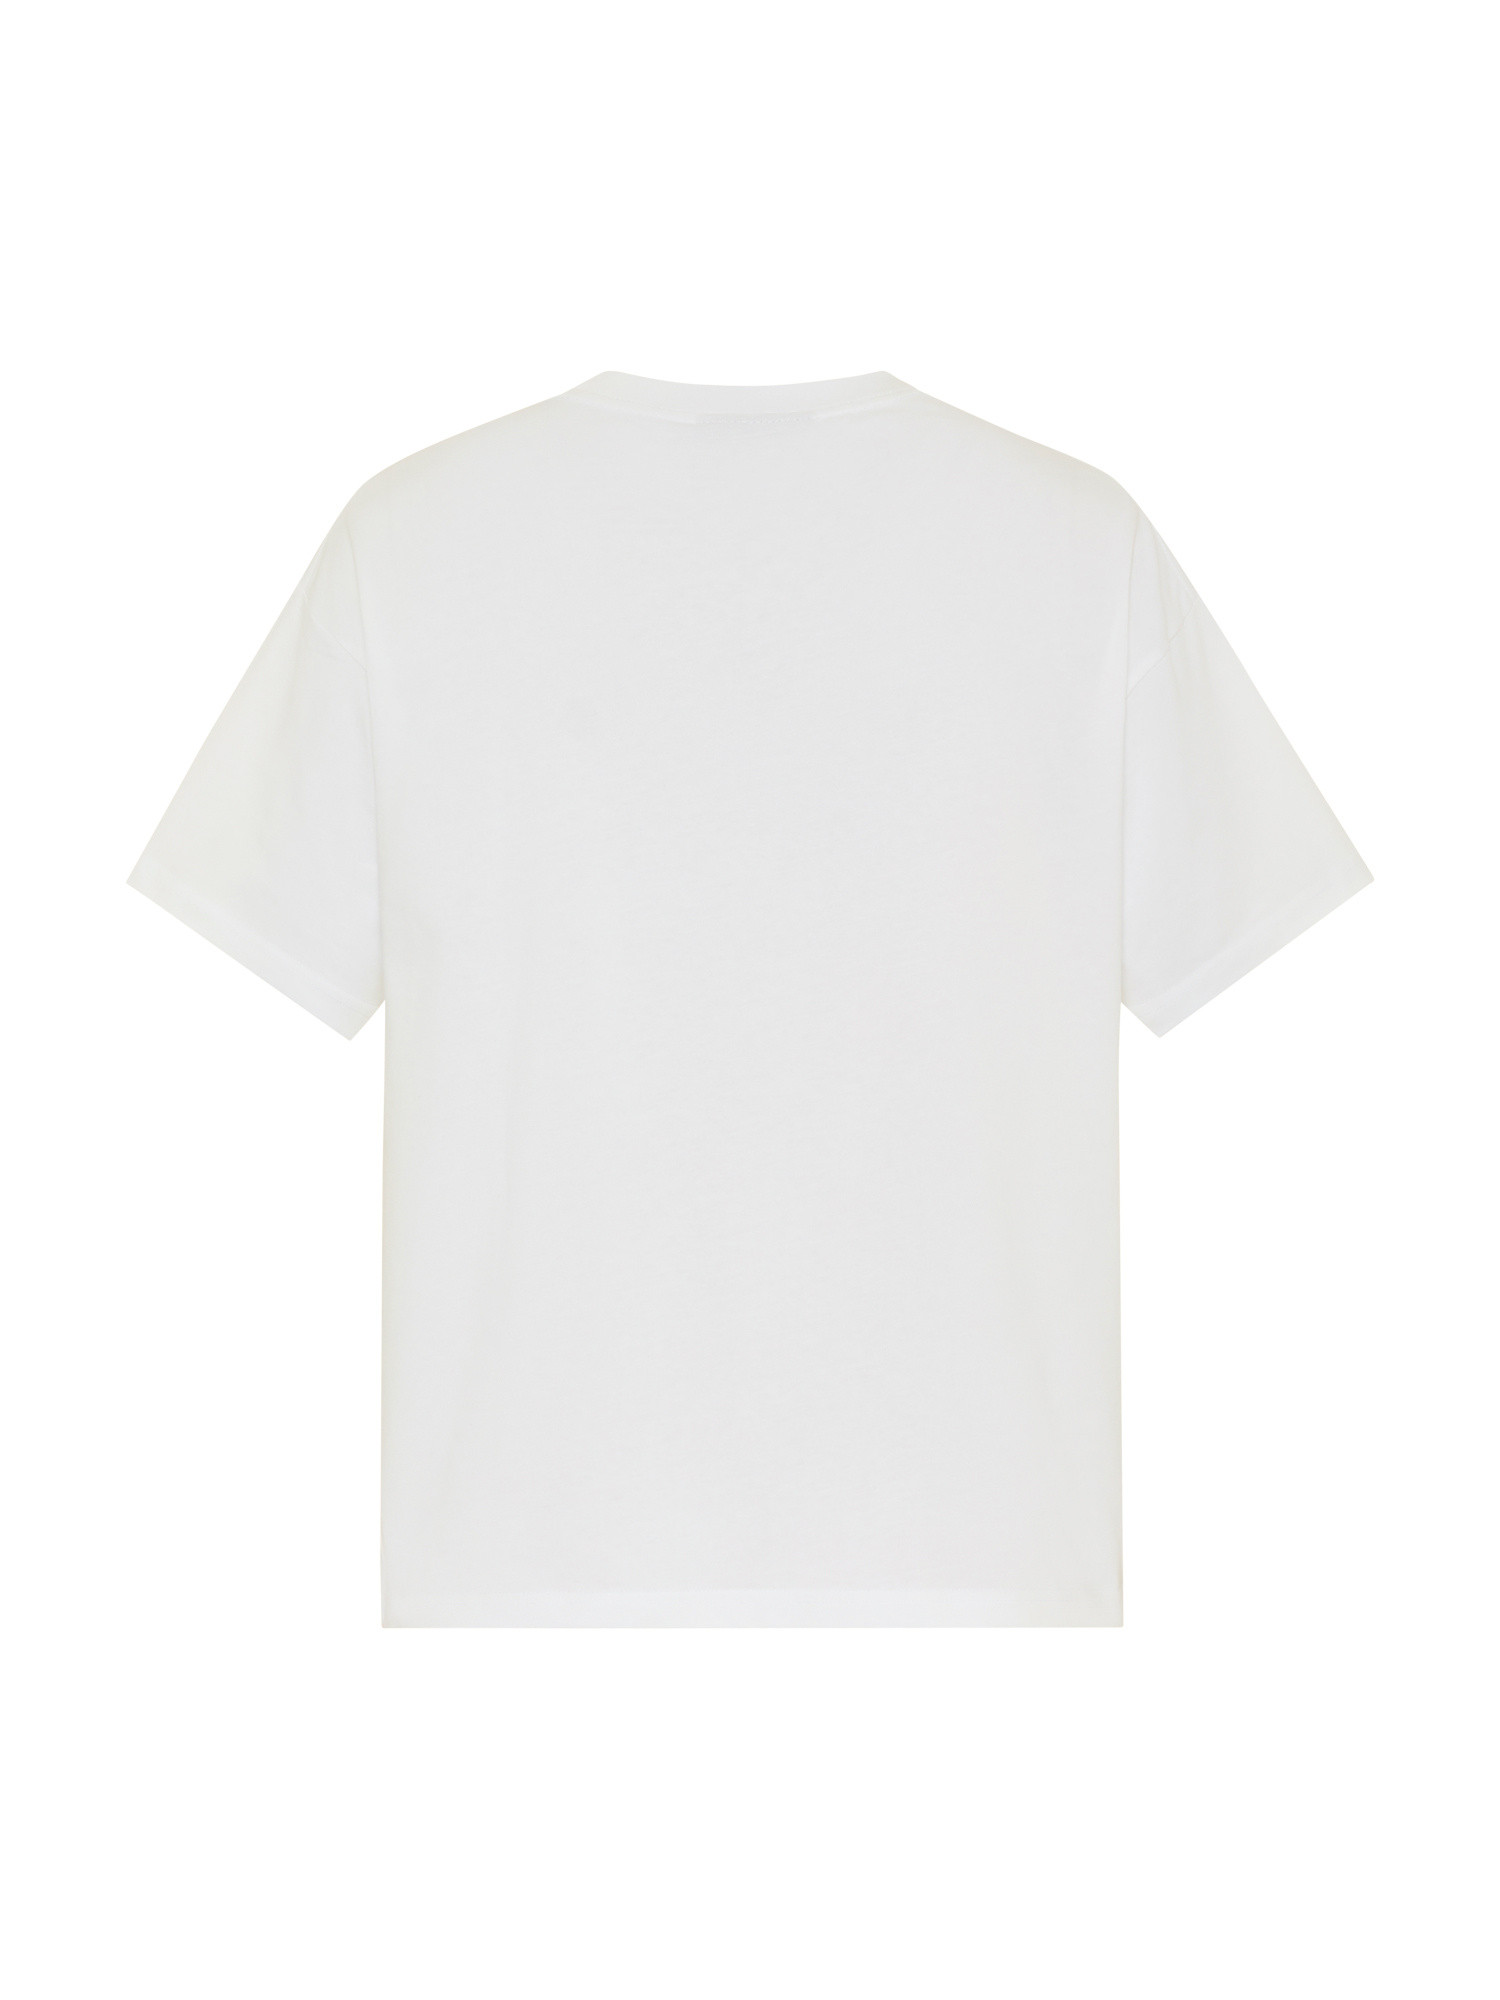 Usual - About T-Shirt, White, large image number 1